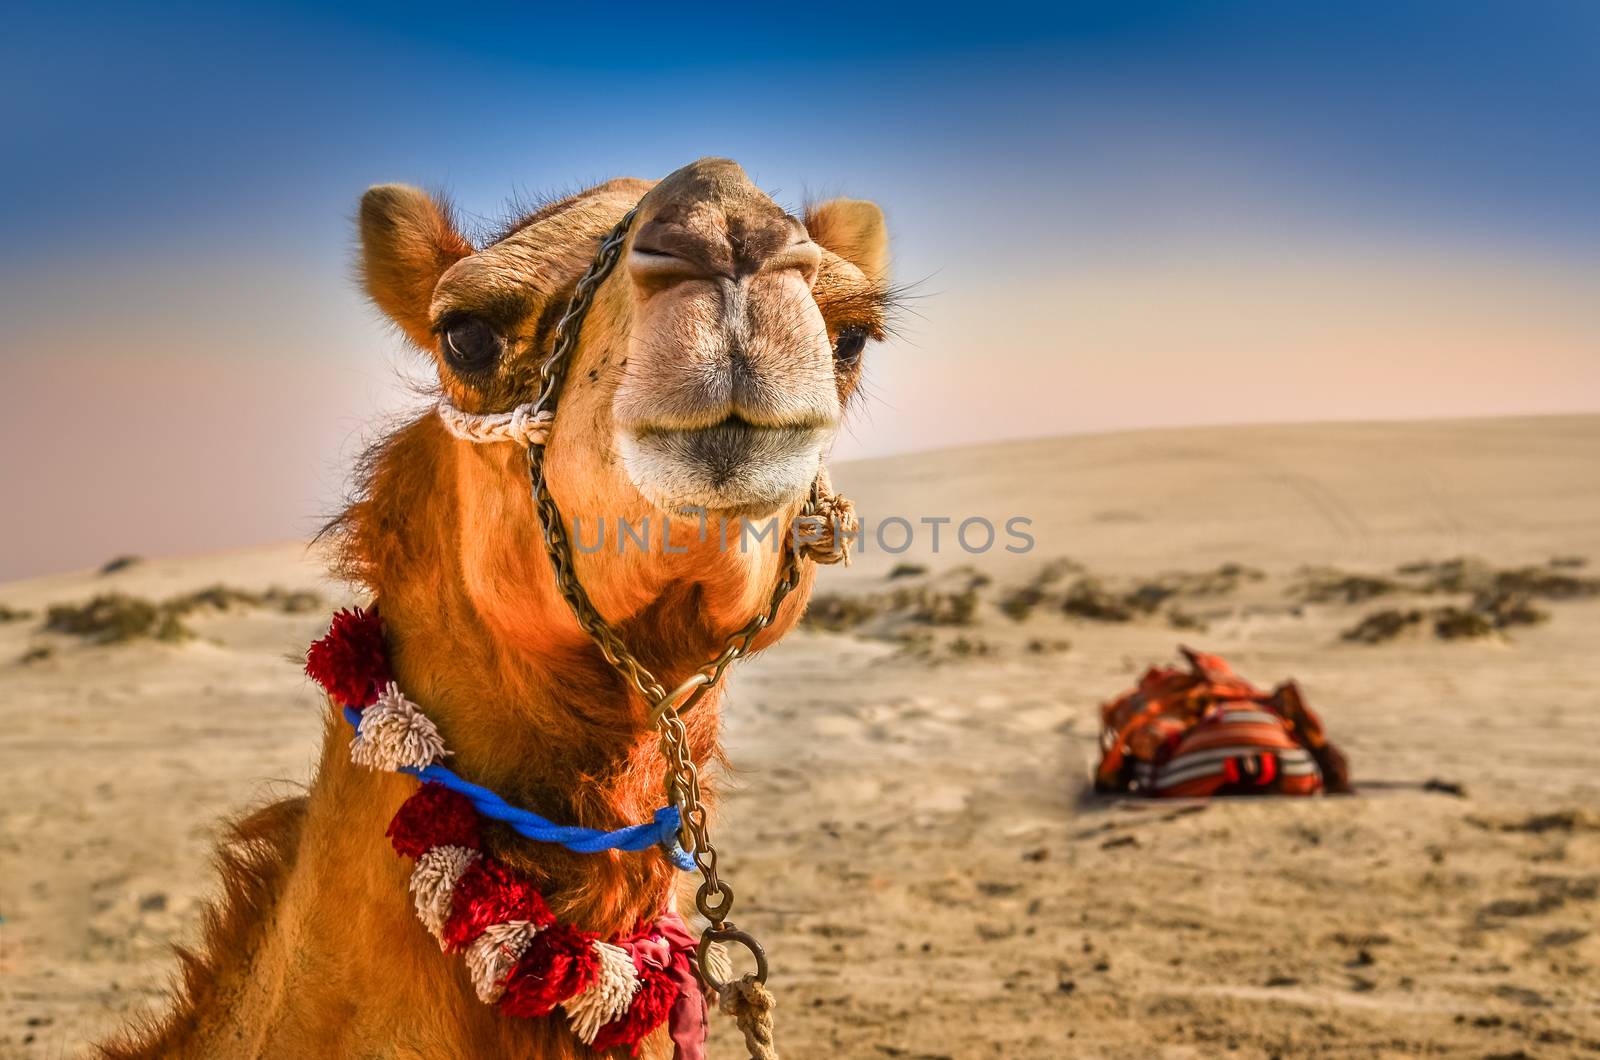 Detail of camel's head with funny expresion by martinm303